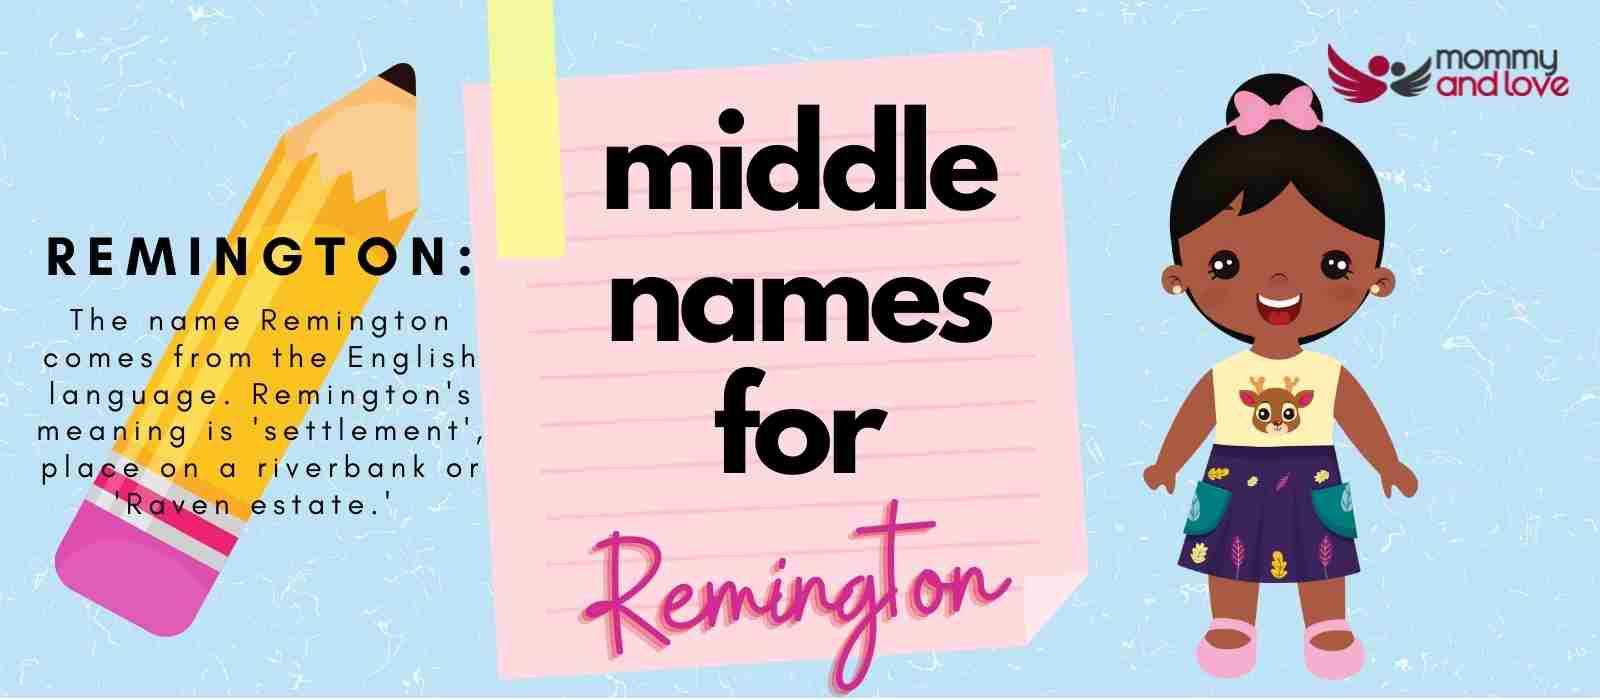 Middle Names for remington girl